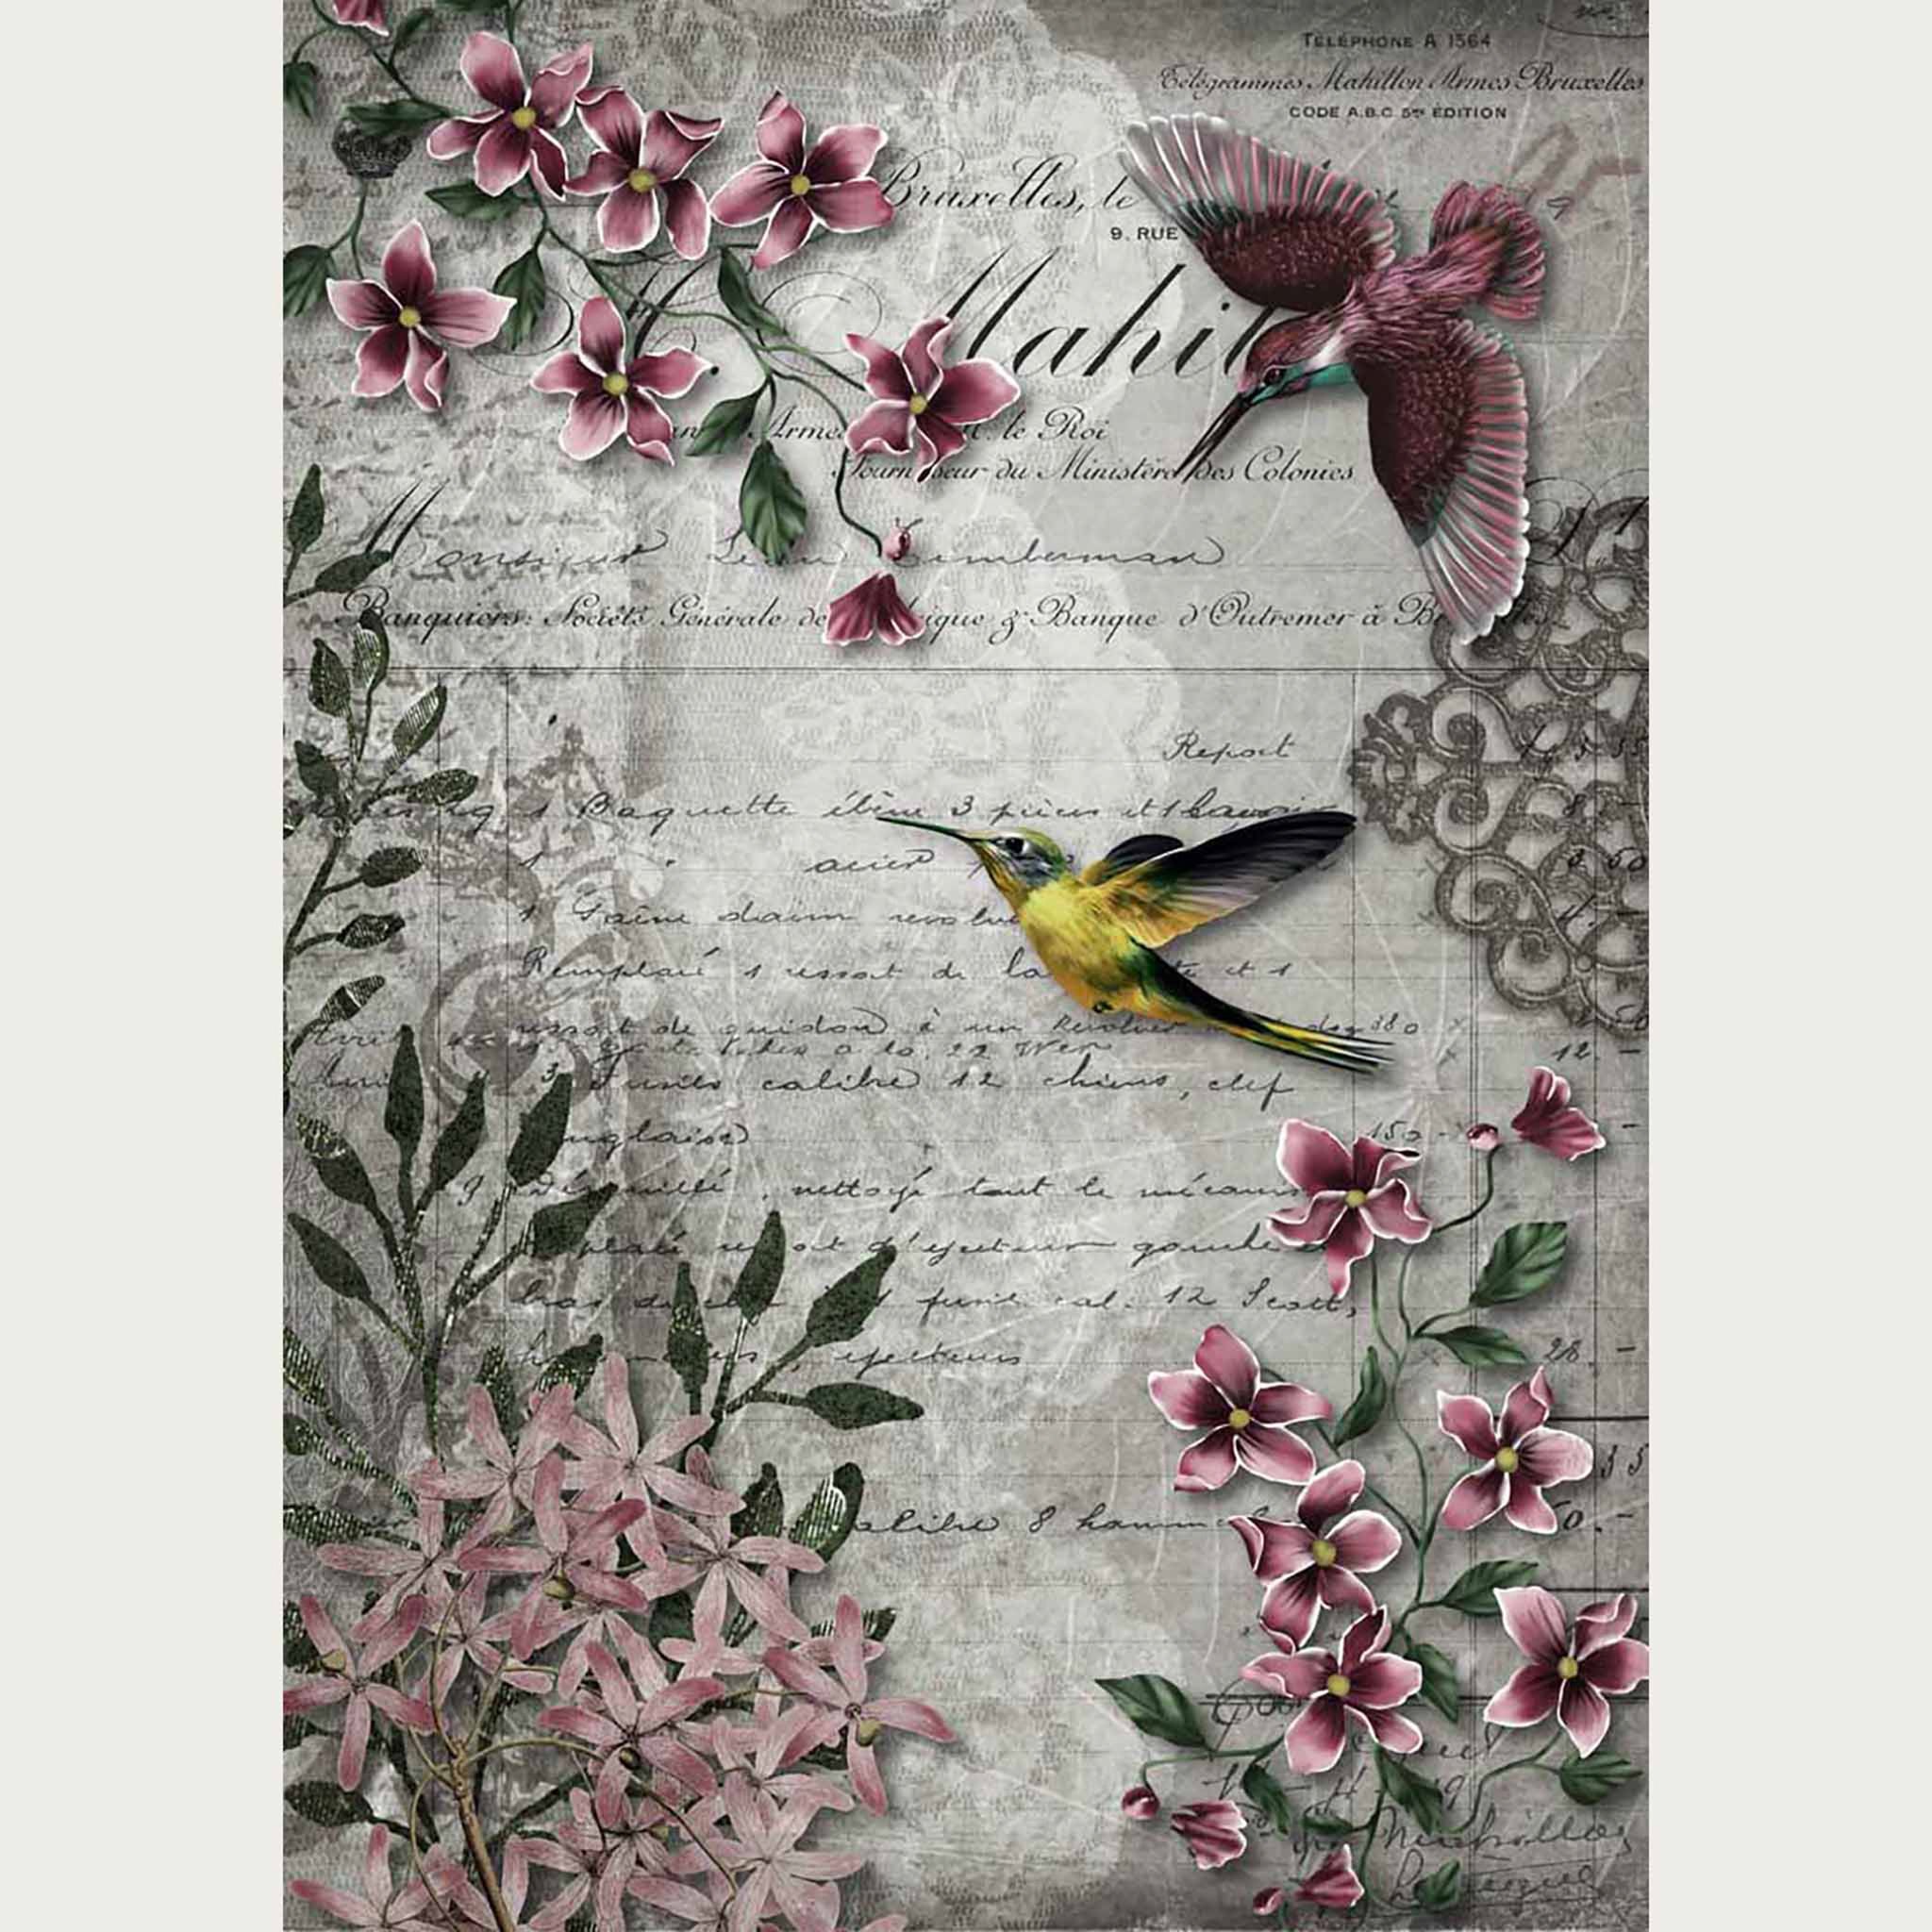 A0 rice paper design featuring a beautiful combination of hummingbirds, flowers, and scrollwork against a light gray script letter. White borders are on the sides.